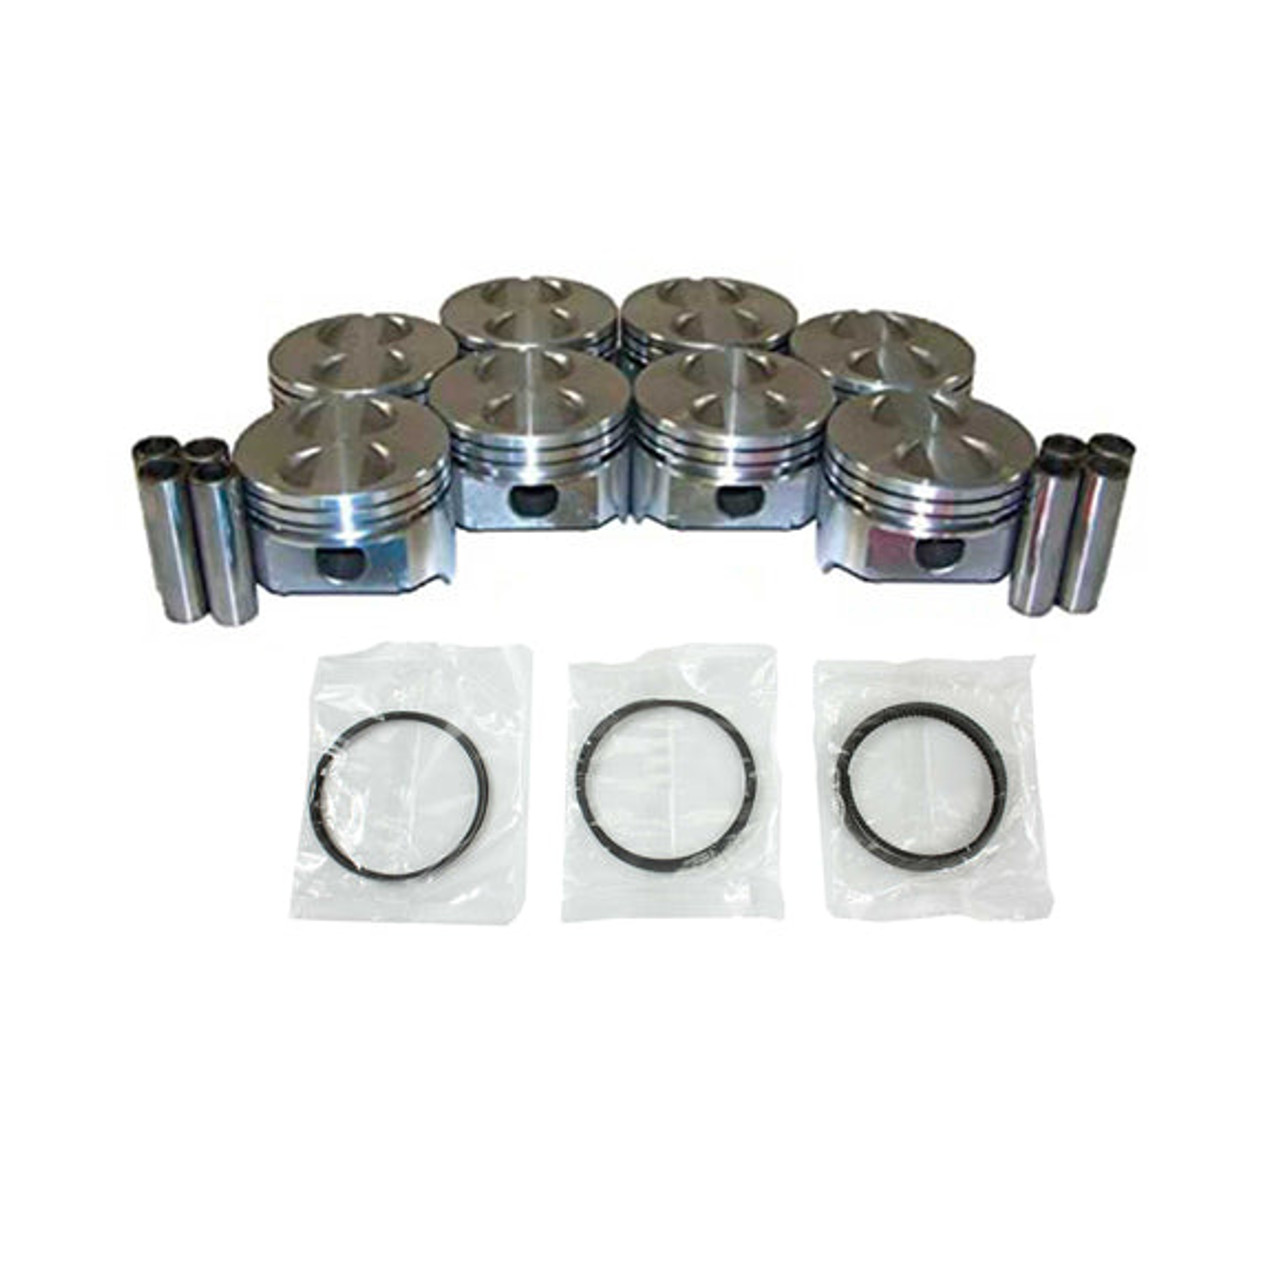 Piston Set with Rings - 1985 Lincoln Continental 5.0L Engine Parts # PRK4112ZE39